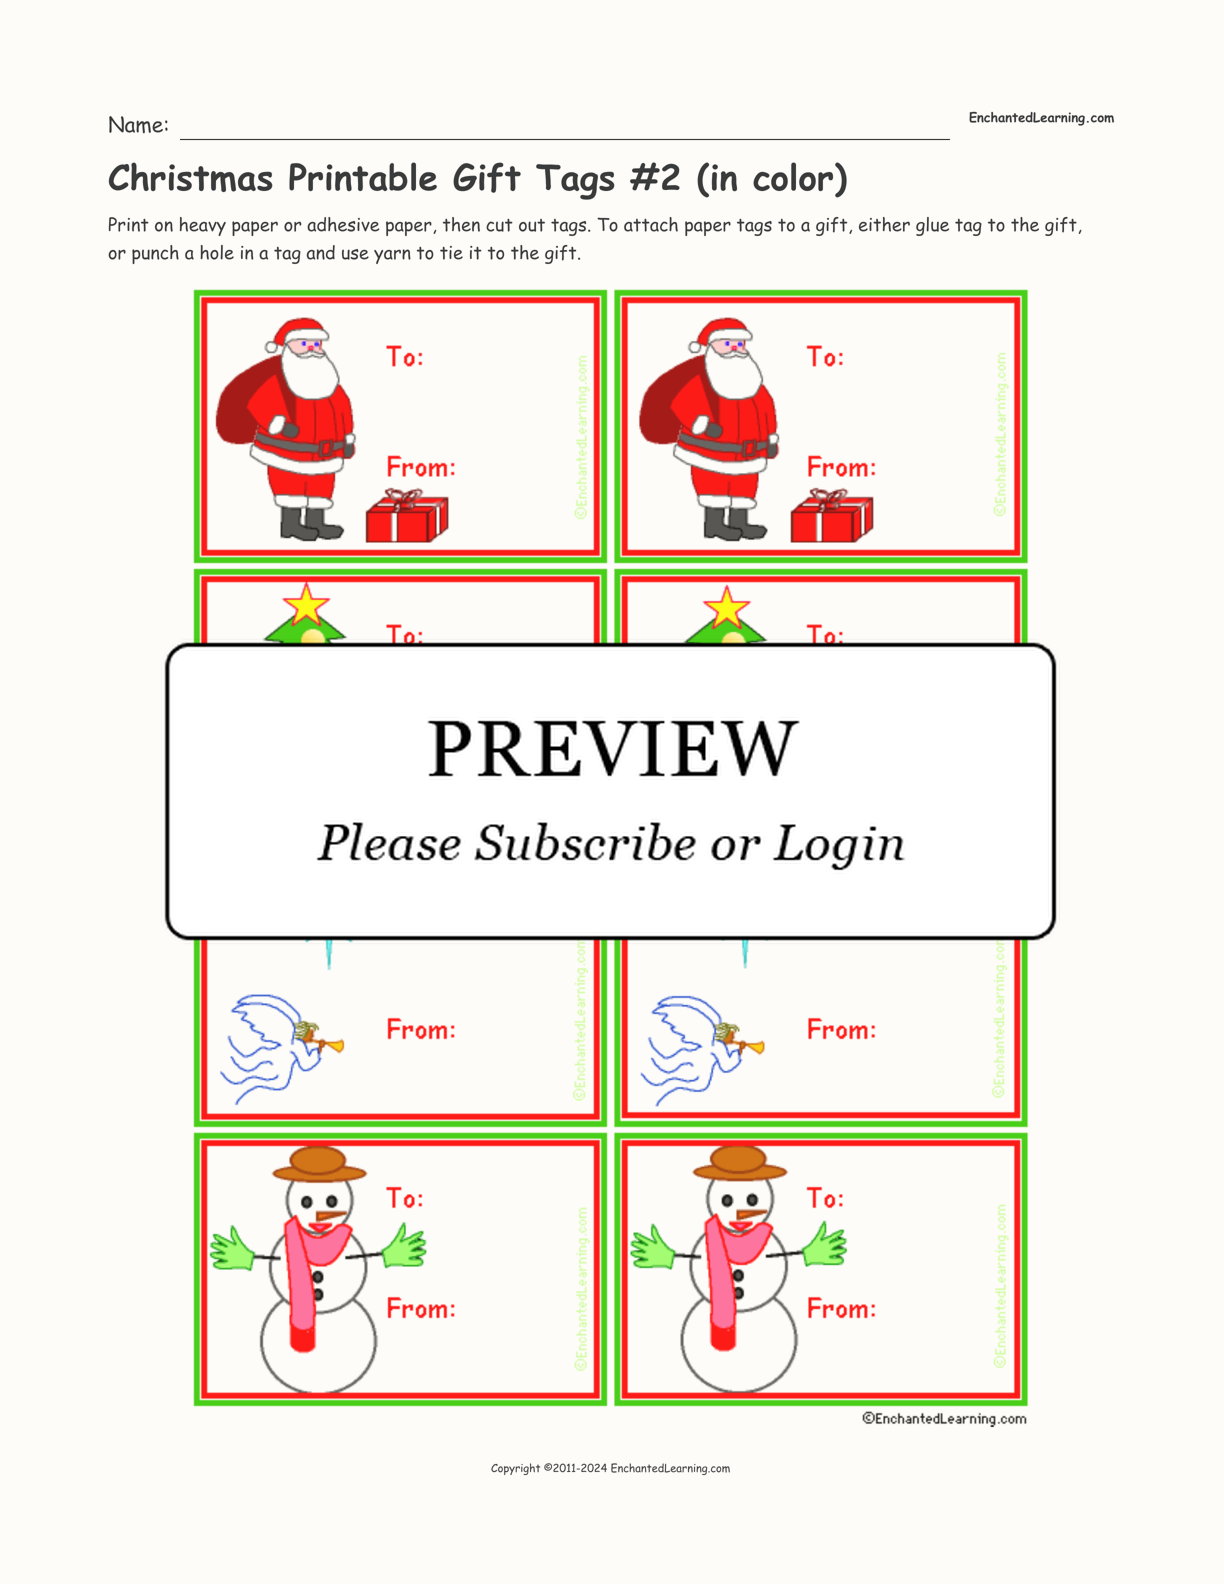 Christmas Printable Gift Tags #2 (in color) interactive printout page 1